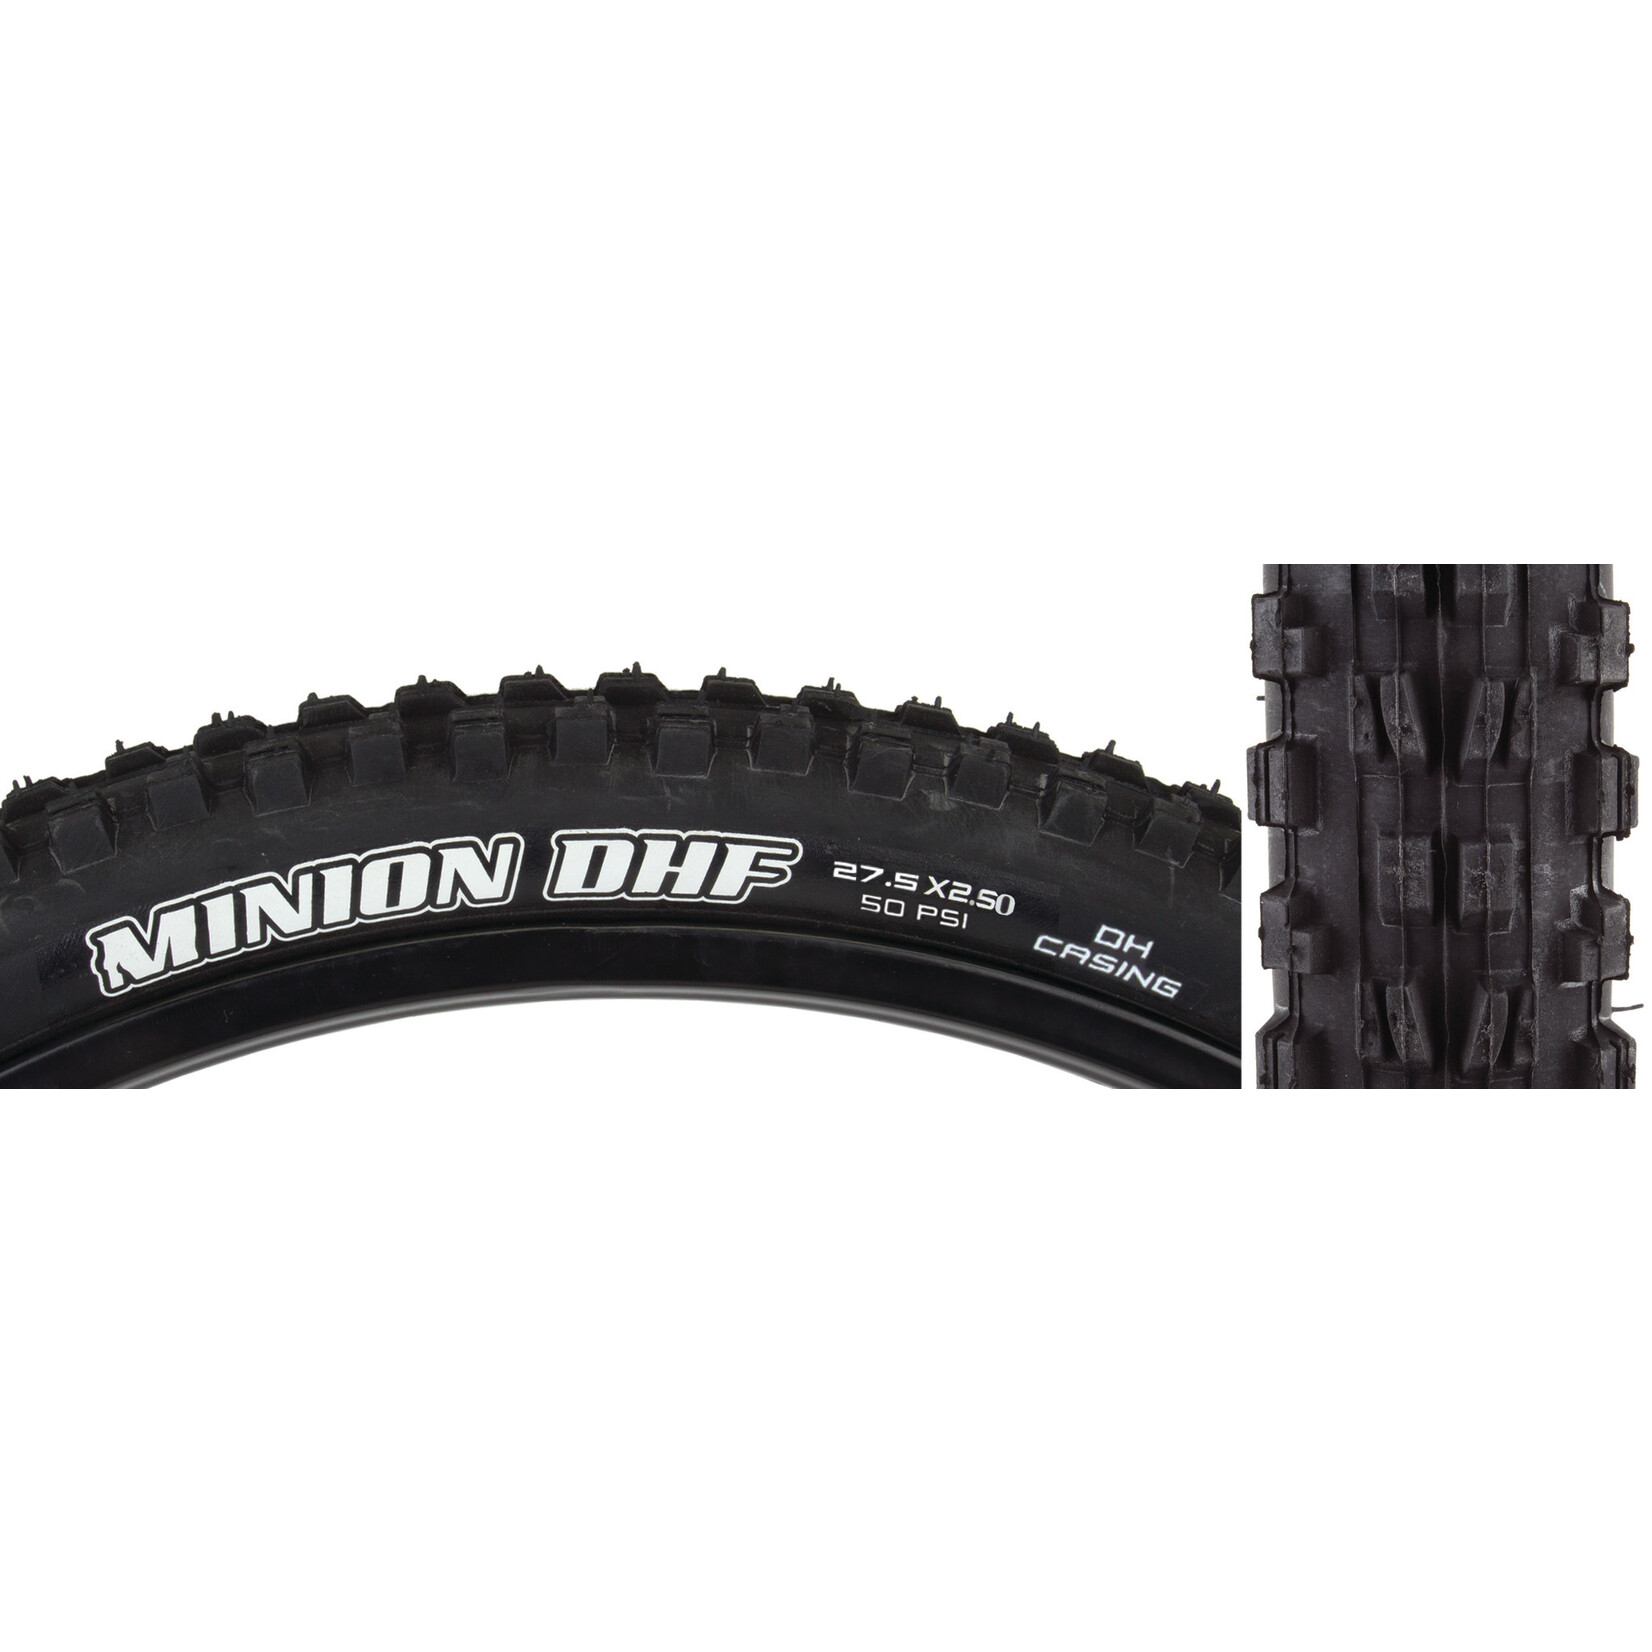 MAXXIS Maxxis Minion DHF Tire - 27.5 x 2.5, Clincher, Wire, Black, 2ply, Wide Trail